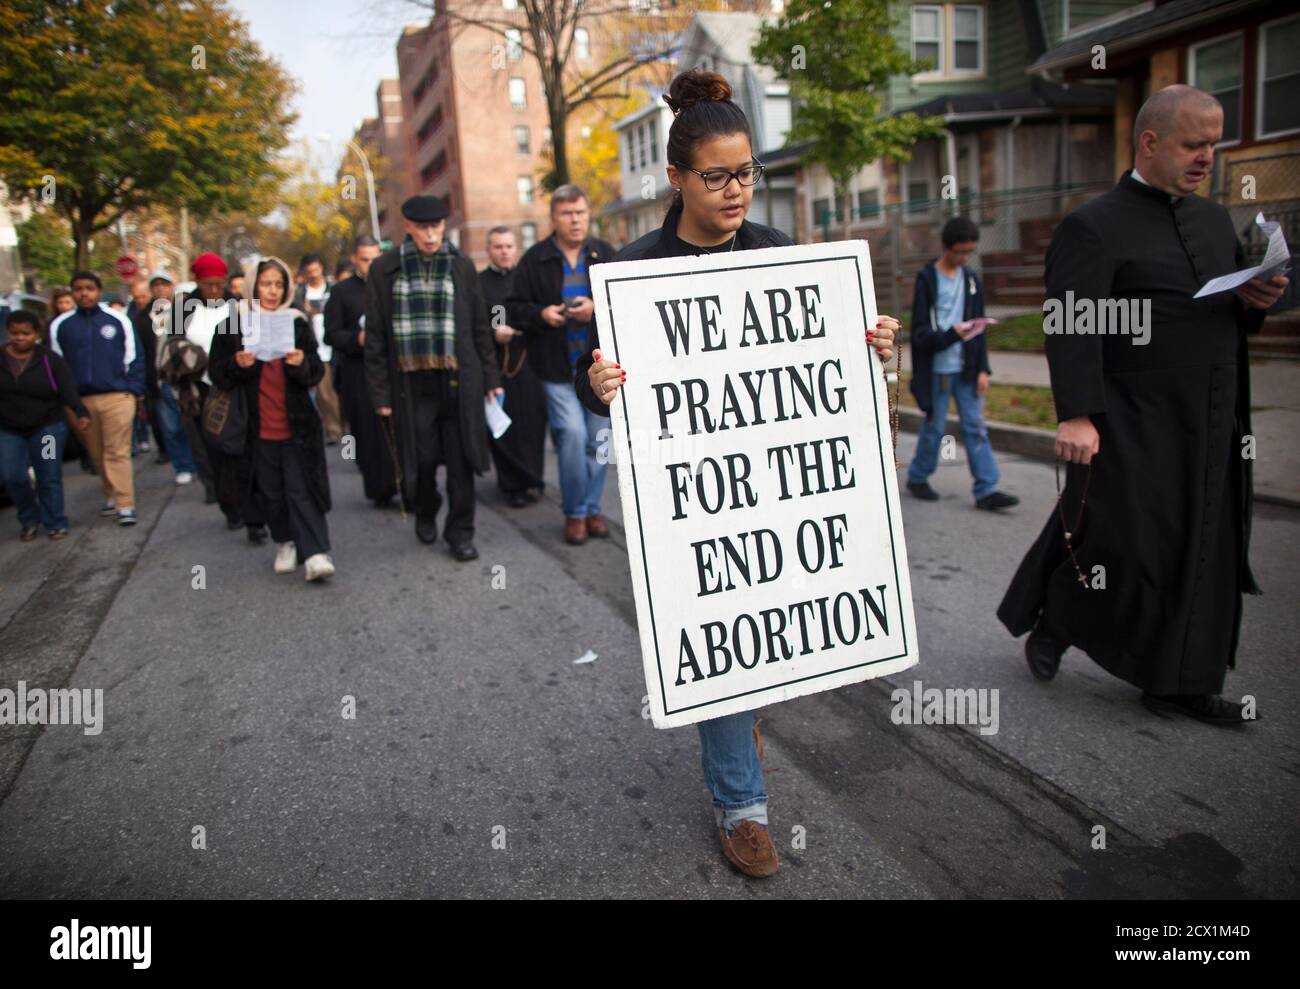 A woman holds a sign during an anti-abortion protest march to the Choices Women's Medical Center in Queens, New York October 20, 2012. The protest was organized by local church, Presentation of the Blessed Virgin Mary and targeted the center which offers abortion procedures. REUTERS/Andrew Kelly (UNITED STATES - Tags: CIVIL UNREST POLITICS) Stock Photo